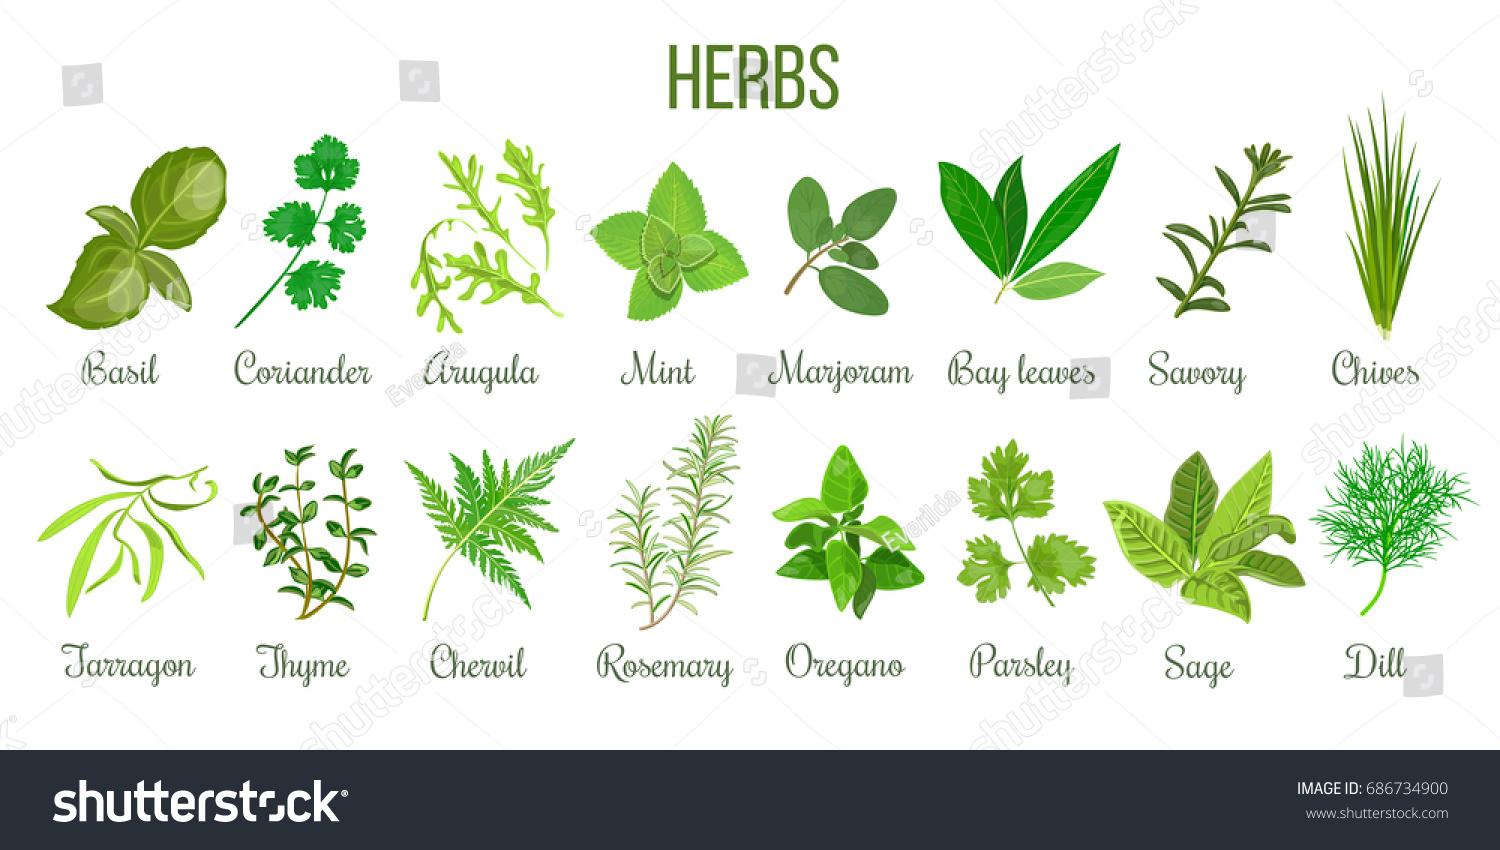 Big icon set of popular culinary herbs. realistic style. Basil, coriander, mint, rosemary, basil, sage, thyme, parsley etc. For cosmetics, store, health care, tag label, food design